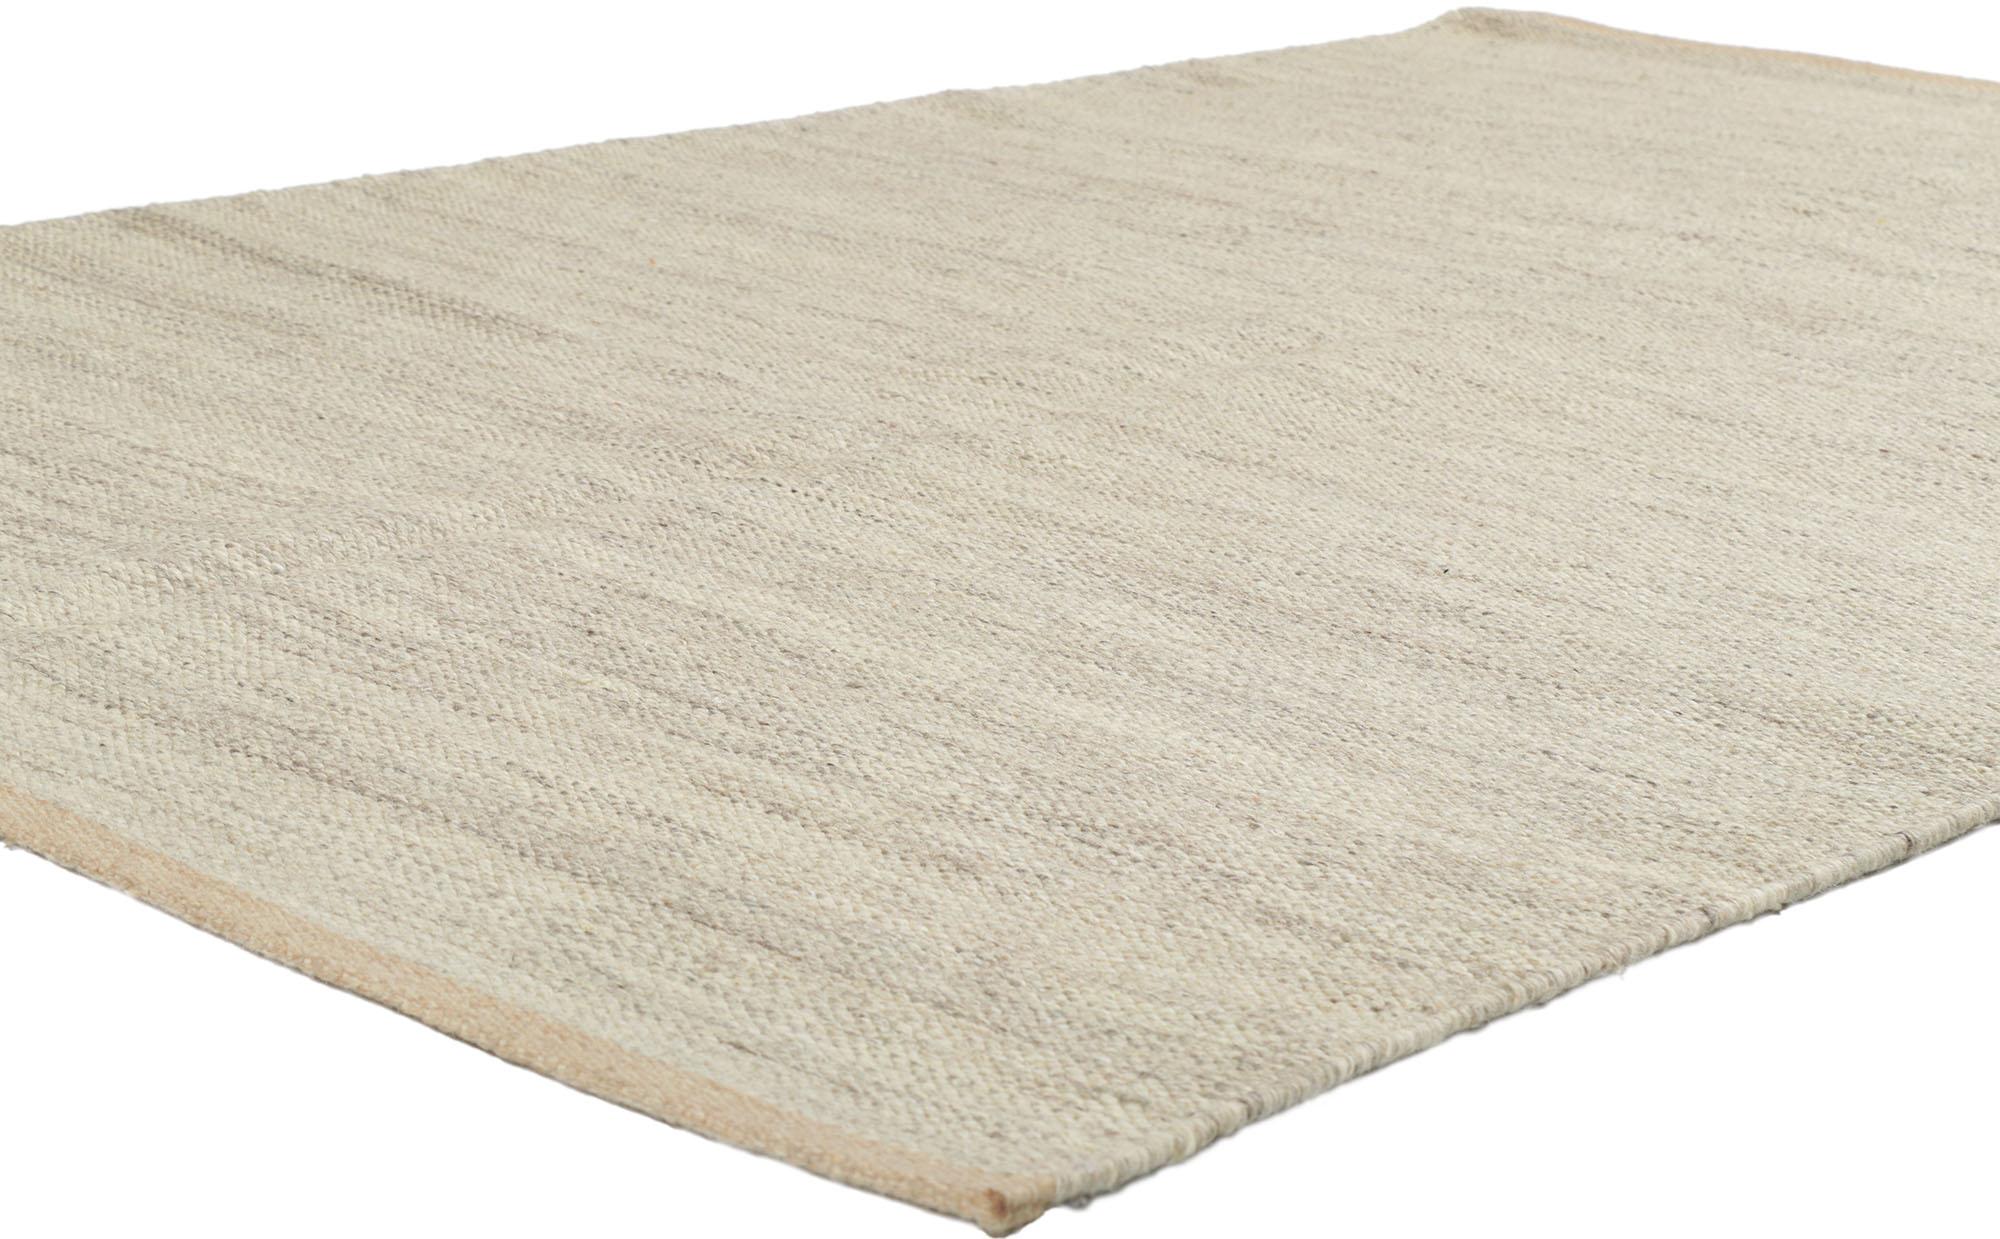 30696 new Swedish inspired Kilim rug with Minimalist Scandinavian Modern style 05'01 x 08'00. Warm and inviting with hygge vibes, this hand-woven wool Swedish inspired Kilim rug beautifully embodies the simplicity of Scandinavian modern style.